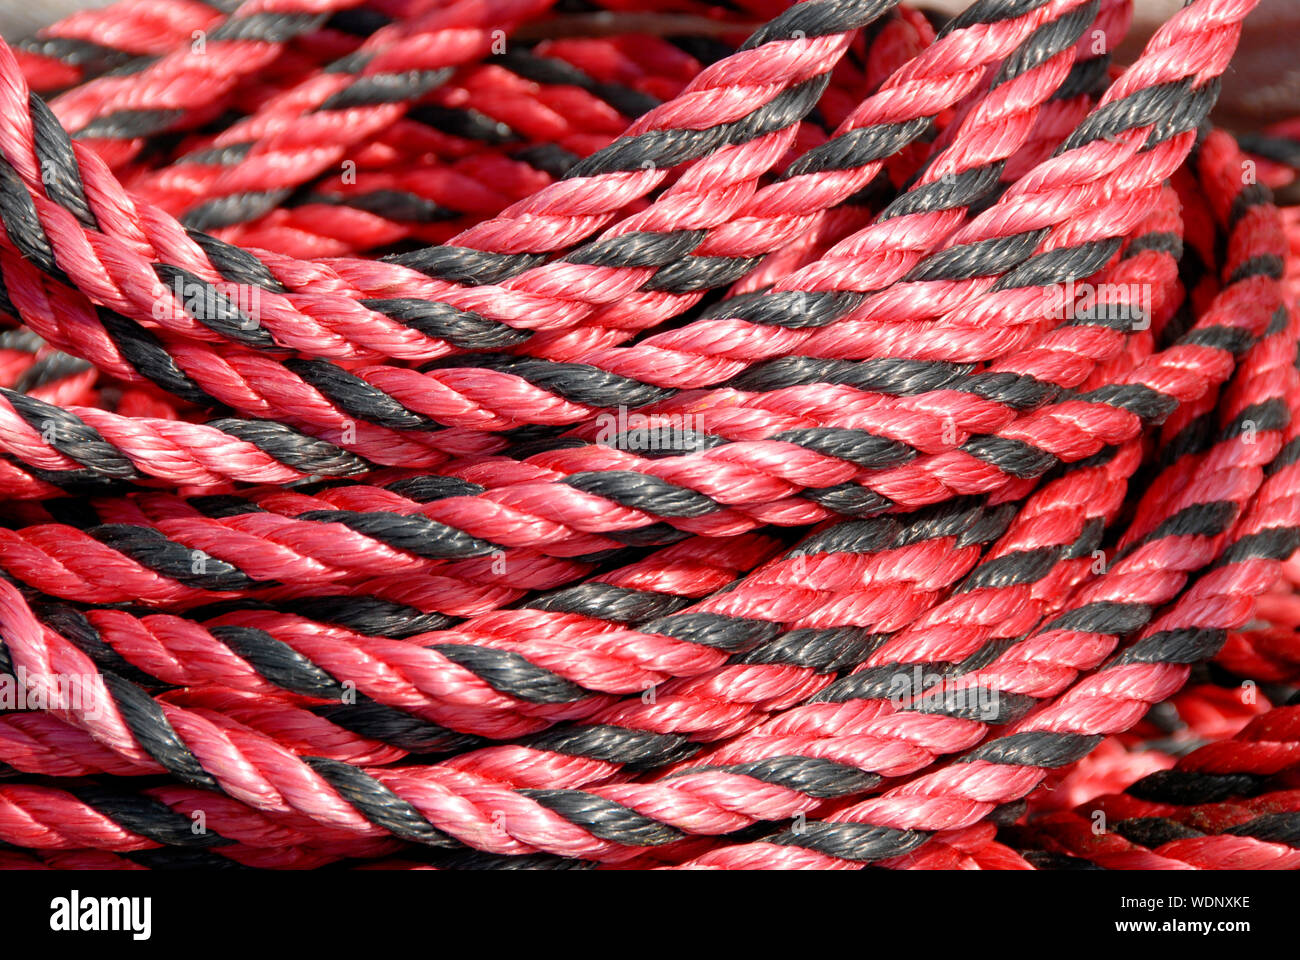 Coil of red and black colored rope, Brancaster Staithe, Norfolk, England Stock Photo